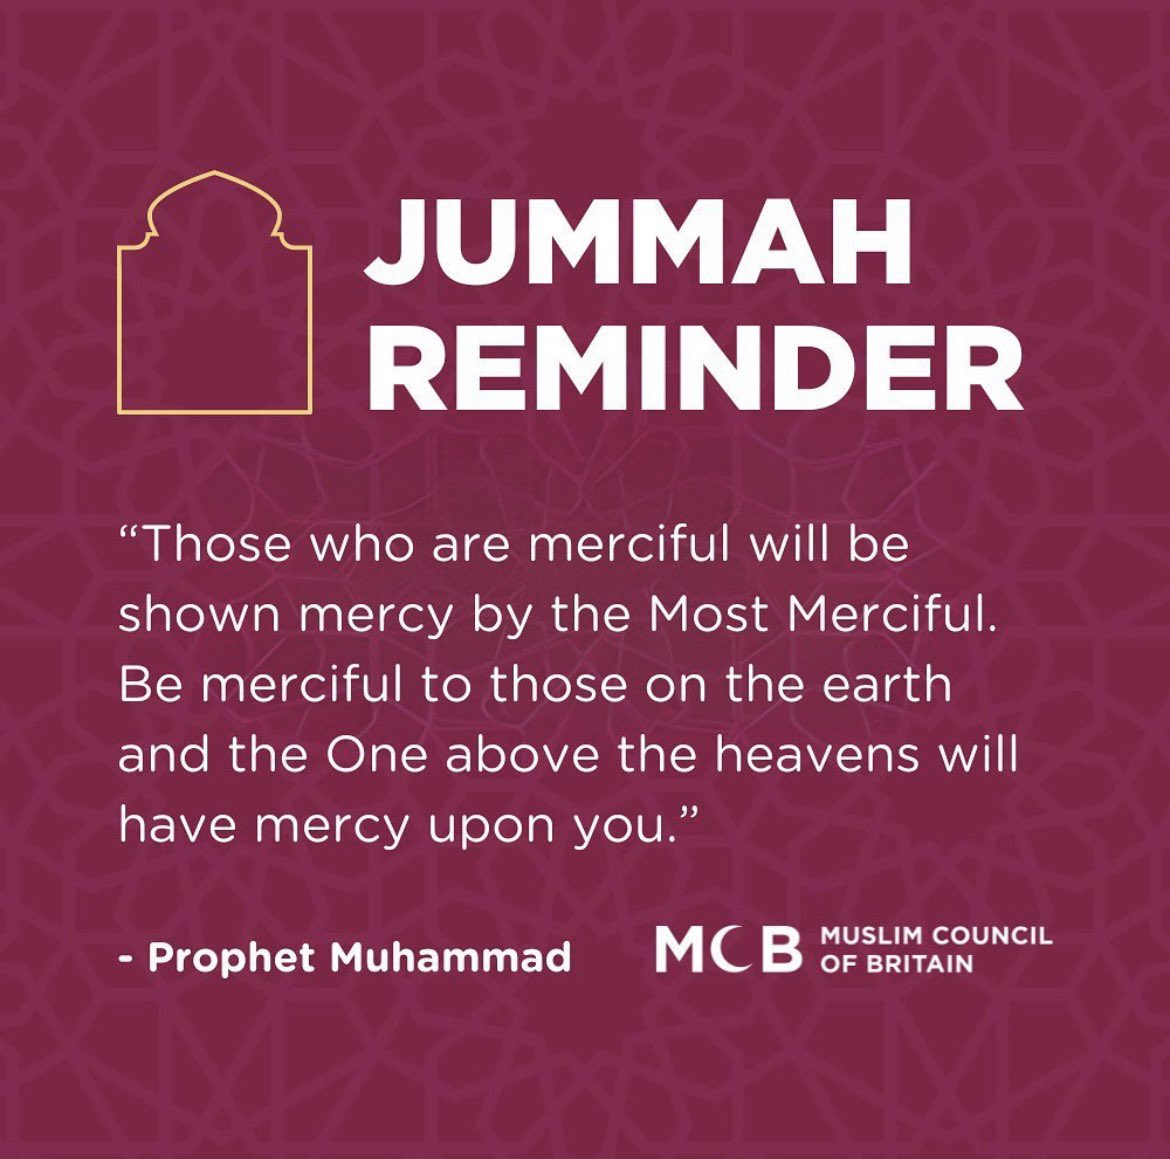 🕌 Jummah Reminder 'Those who are merciful will be shown mercy by the Most Merciful. Be merciful to those on the earth and the One above the heavens will have mercy upon you.' - Prophet Muhammad Let's spread kindness and have mercy on others on this blessed Friday! 🌟